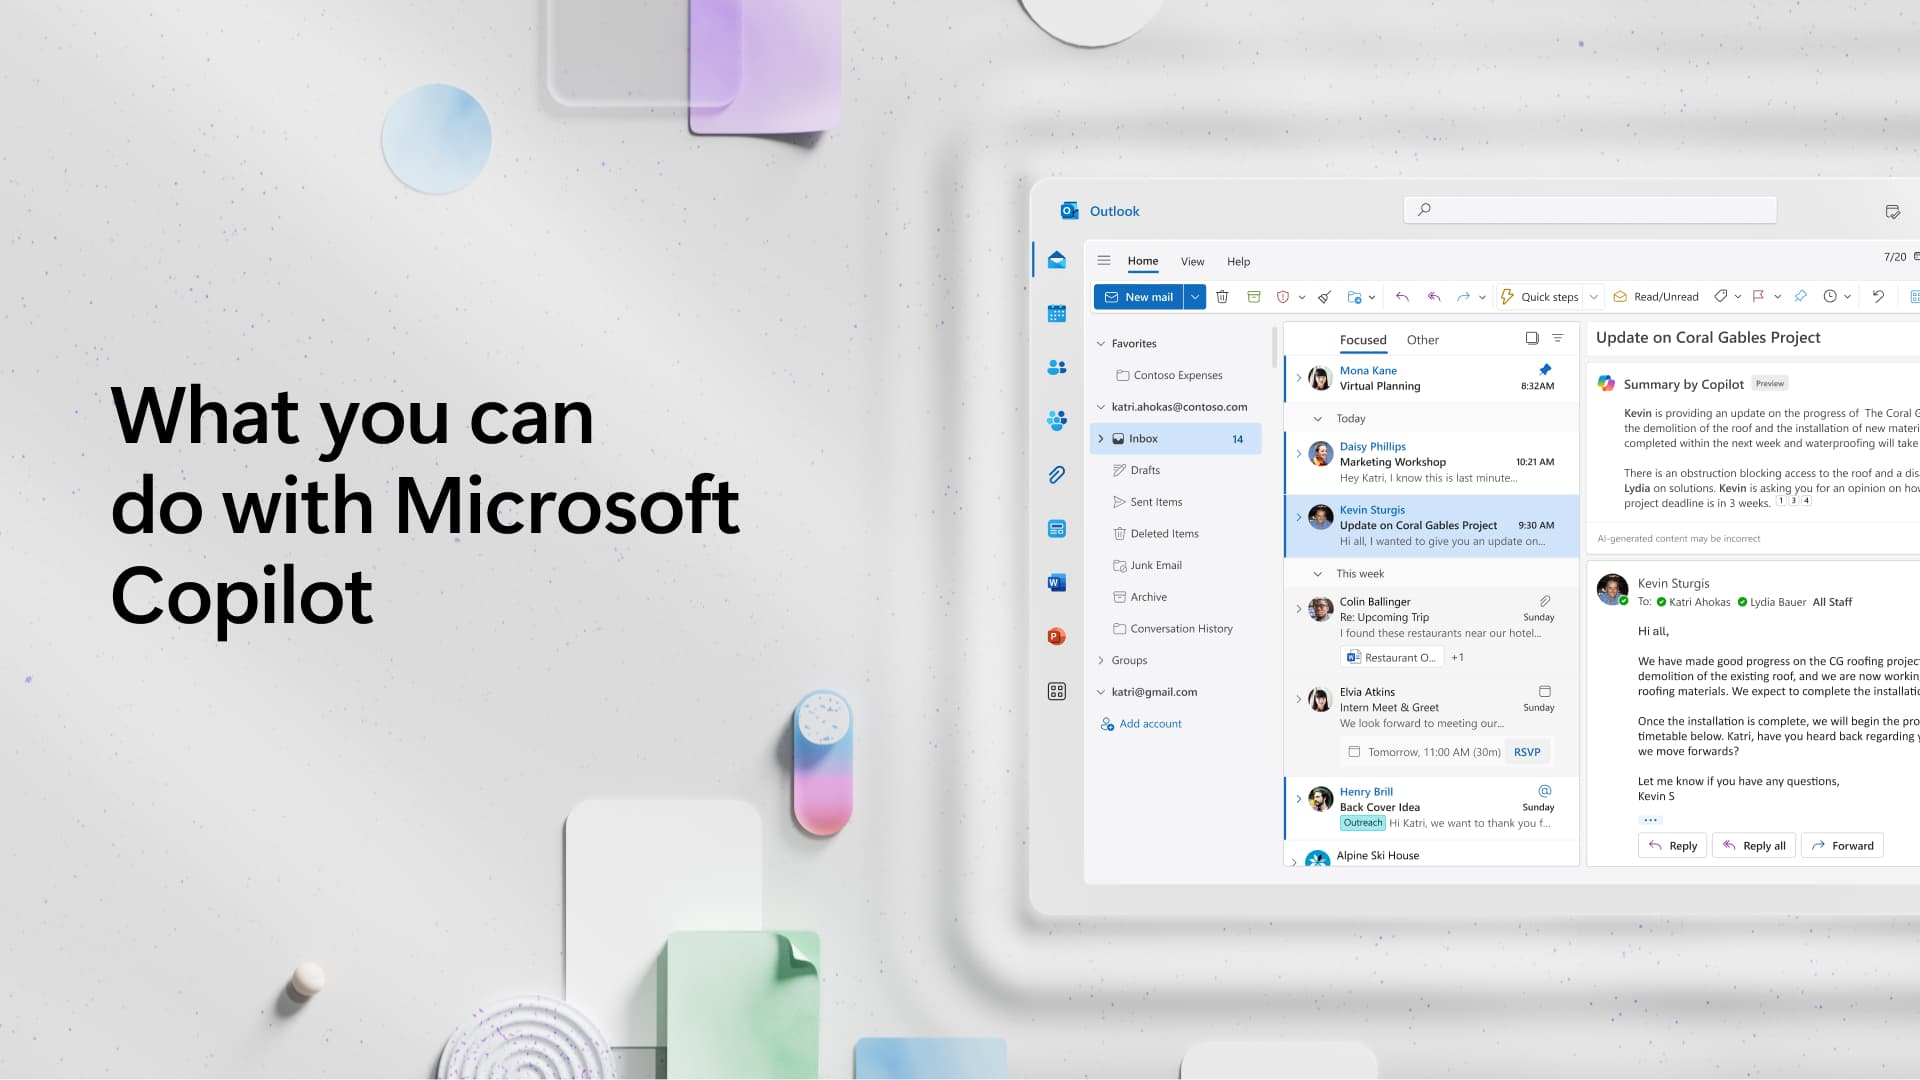 Video: What you can do with Microsoft Copilot